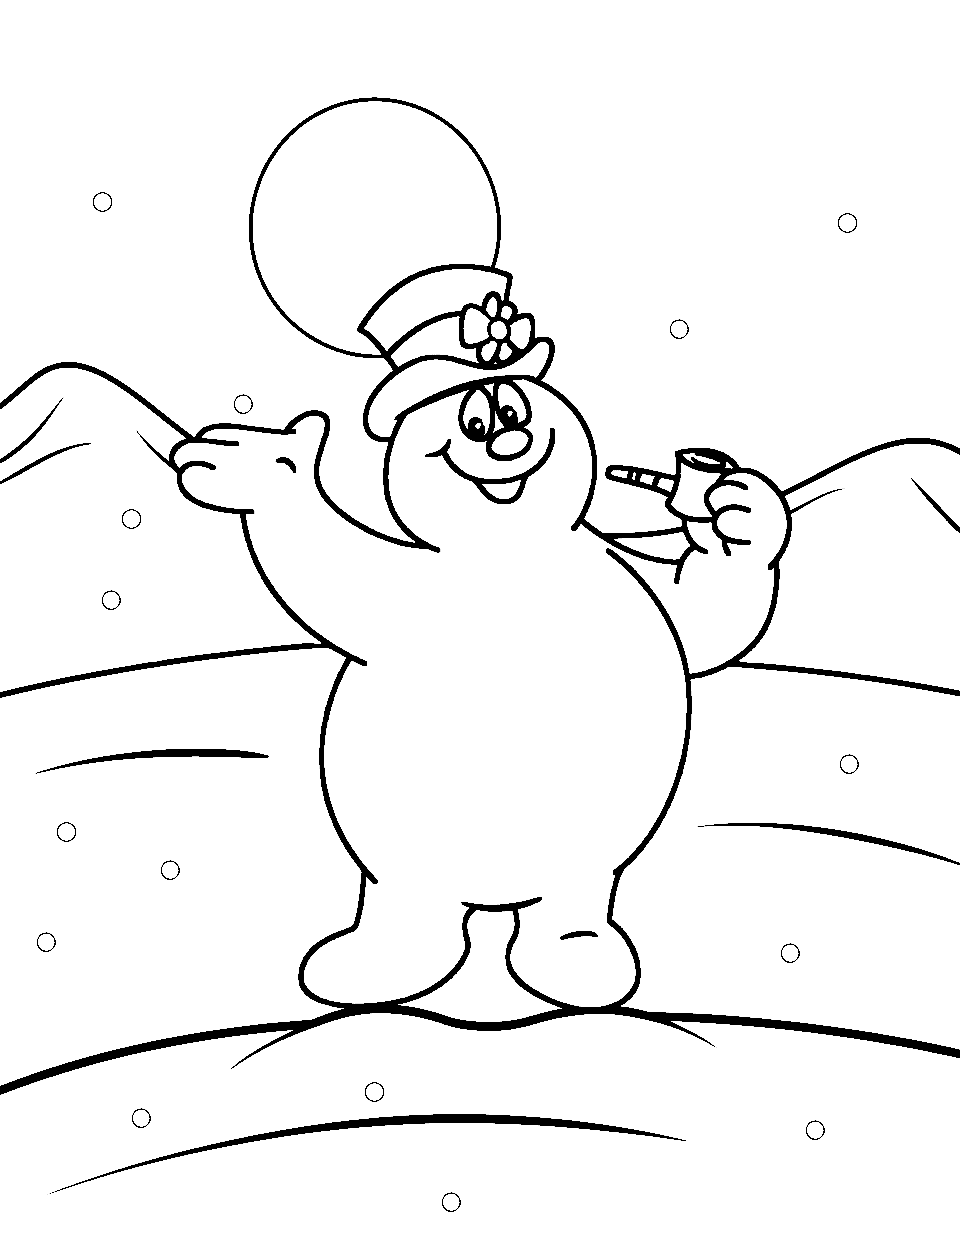 Snowman coloring pages free printable sheets